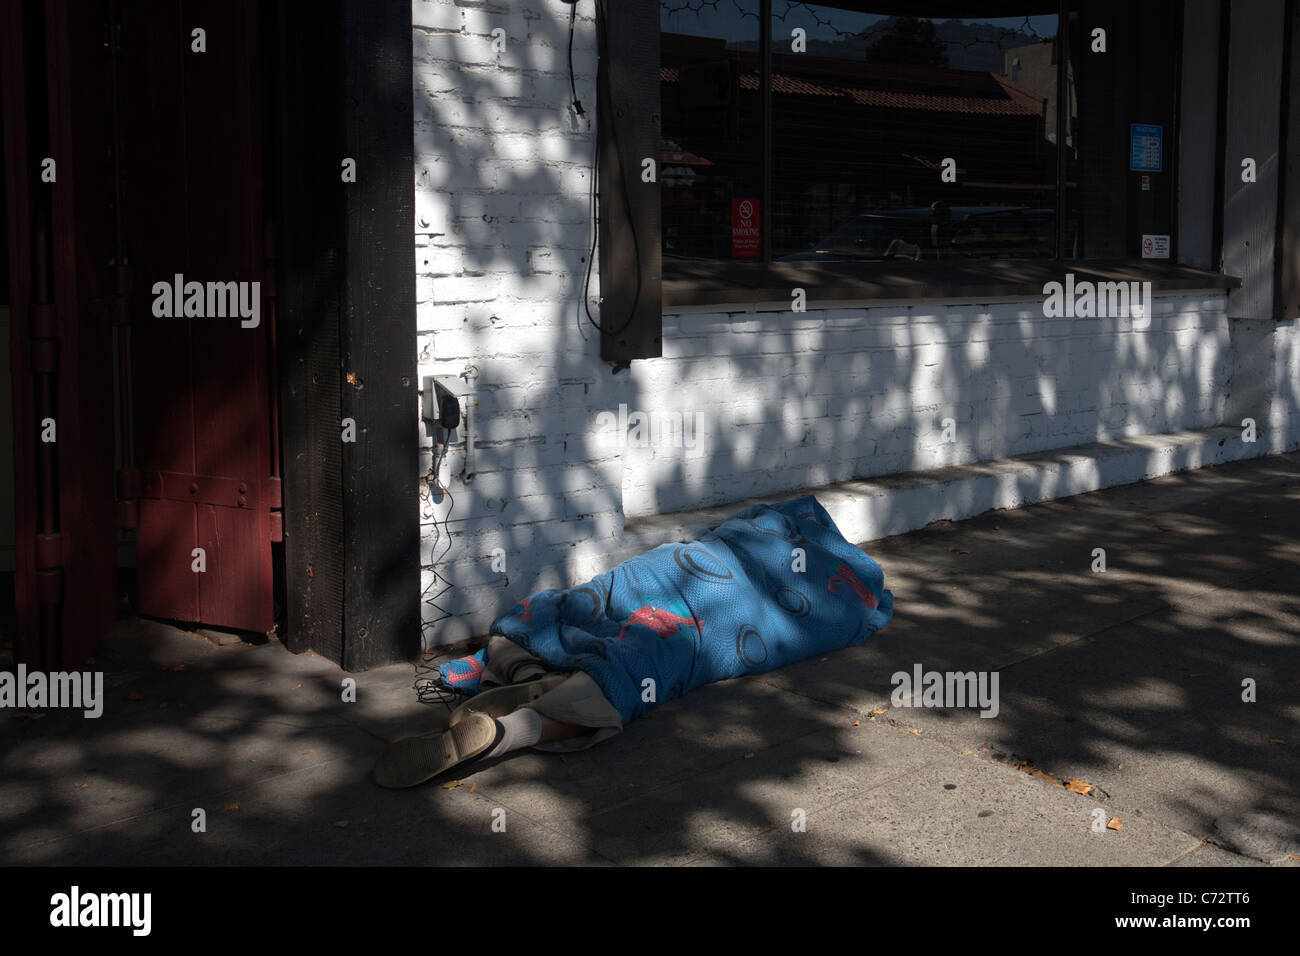 Homeless Person Derelict High Resolution Stock Photography And Images Alamy